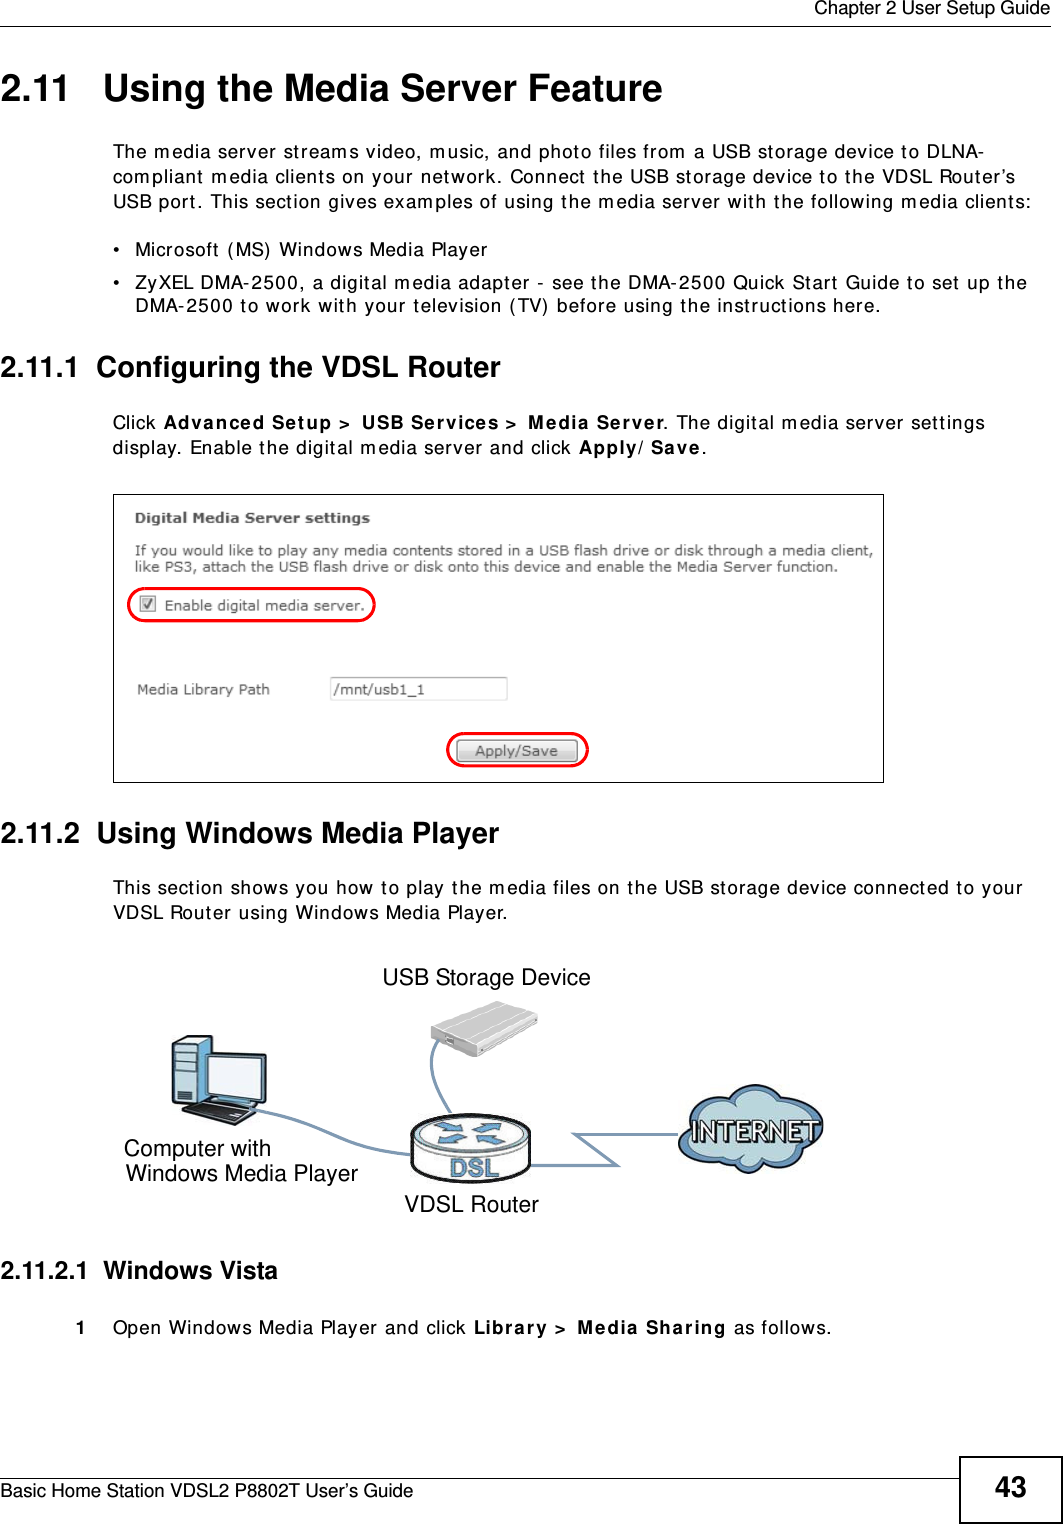  Chapter 2 User Setup GuideBasic Home Station VDSL2 P8802T User’s Guide 432.11   Using the Media Server FeatureThe m edia server st ream s video, m usic, and phot o files from  a USB st orage device t o DLNA-com pliant  m edia client s on your network. Connect t he USB st orage device to the VDSL Router’s USB port. This sect ion gives examples of using t he m edia server with the following media client s:  • Microsoft ( MS)  Windows Media Player • ZyXEL DMA- 2500, a digital m edia adapt er -  see t he DMA-2500 Quick St art Guide to set  up the DMA-2500 to work with your television ( TV)  before using t he inst ruct ions here.  2.11.1  Configuring the VDSL RouterClick Advan ce d Setup &gt;  USB Se rvices &gt;  Media  Se rver. The digit al m edia server set tings display. Enable t he digital m edia server and click Apply/ Save.Tutorial: USB  Services &gt; Media  Server2.11.2  Using Windows Media PlayerThis sect ion shows you how t o play the media files on t he USB st orage device connect ed t o your VDSL Router using Windows Media Player. Tutorial: Media Server Setup (Using Windows Media Player)2.11.2.1  Windows Vista1Open Windows Media Player and click Libr ary &gt;  Me dia Sh aring as follows.Computer withVDSL RouterUSB Storage DeviceWindows Media Player